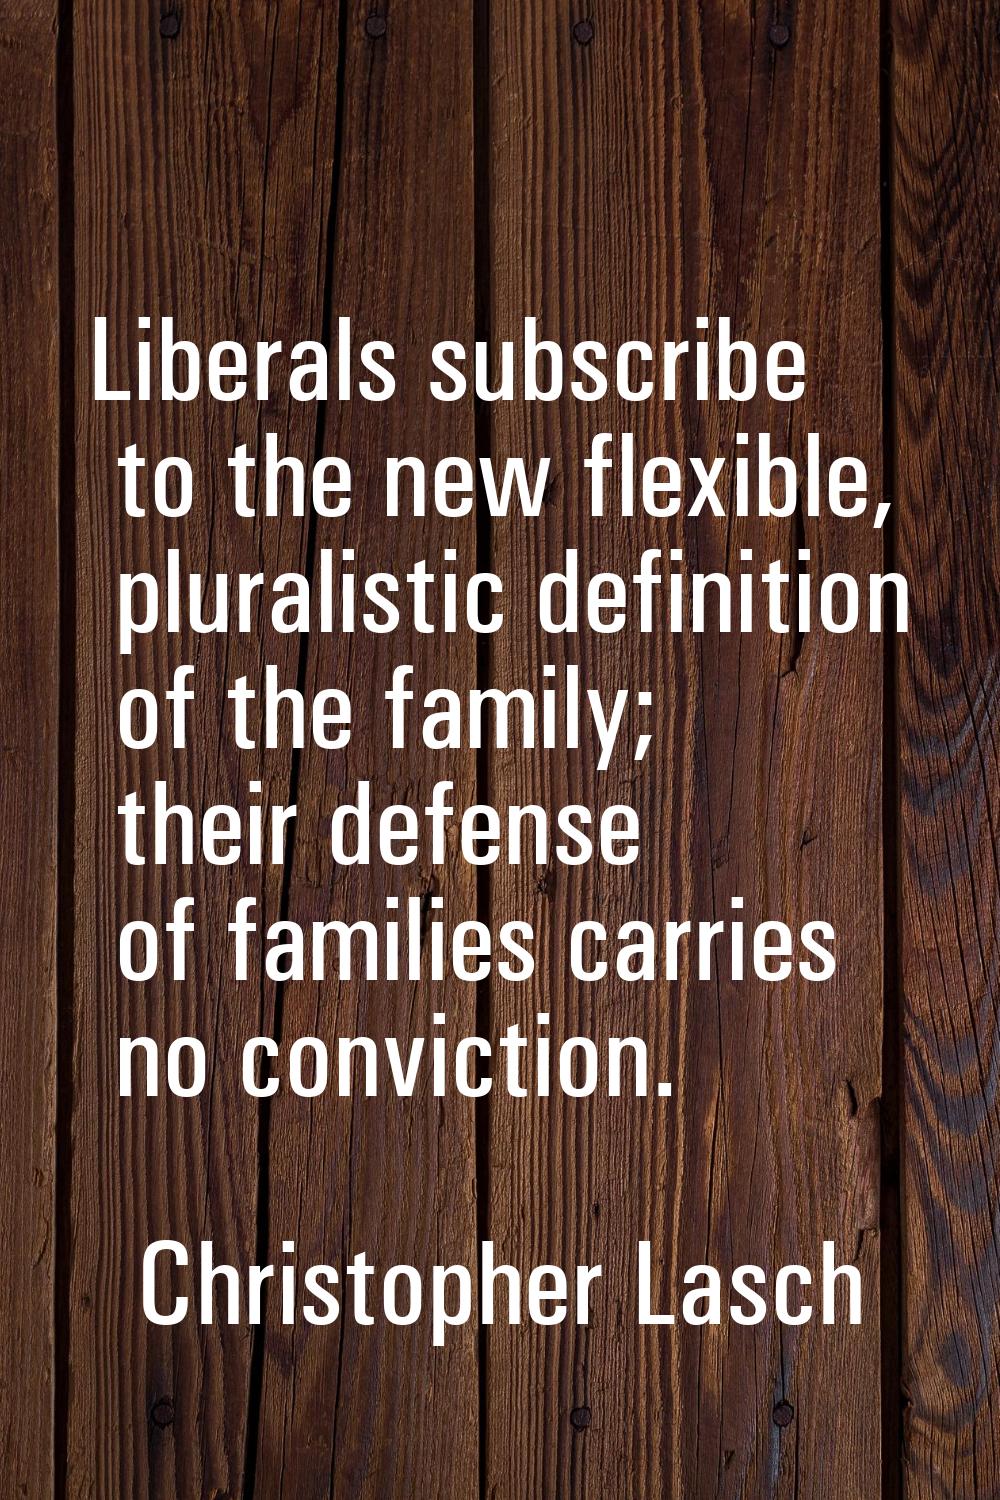 Liberals subscribe to the new flexible, pluralistic definition of the family; their defense of fami